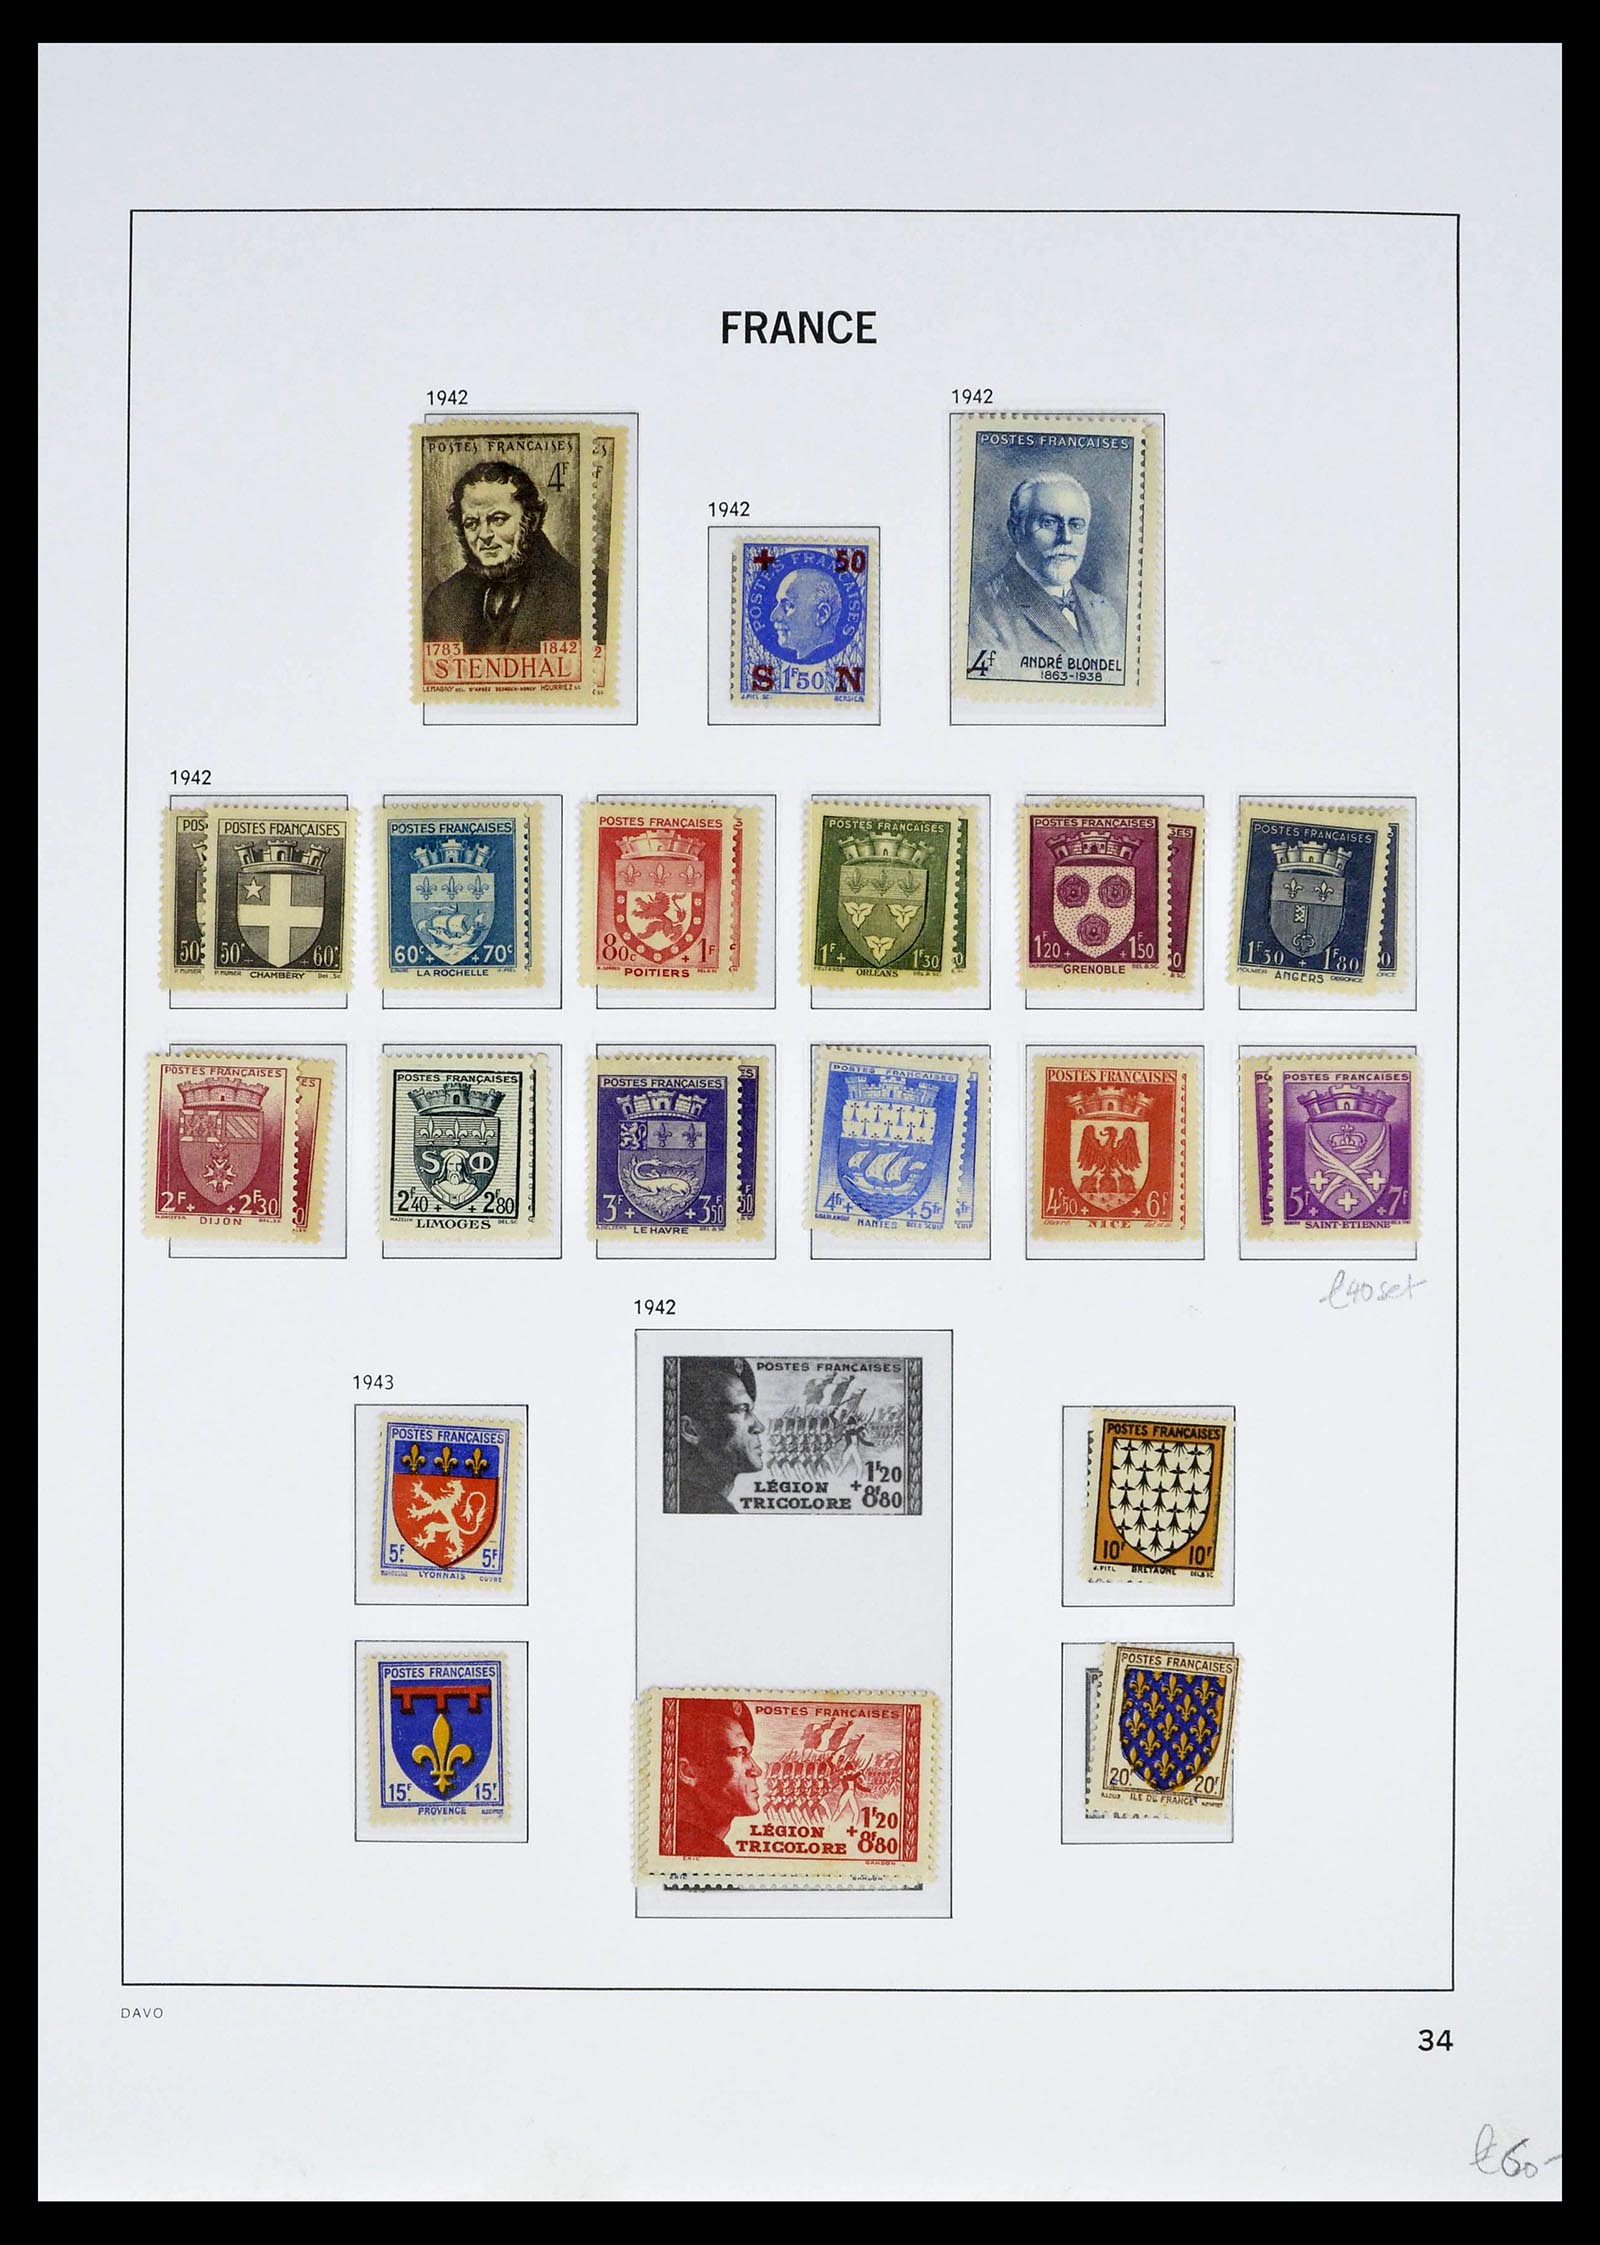 39335 0049 - Stamp collection 39335 France 1849-1969.